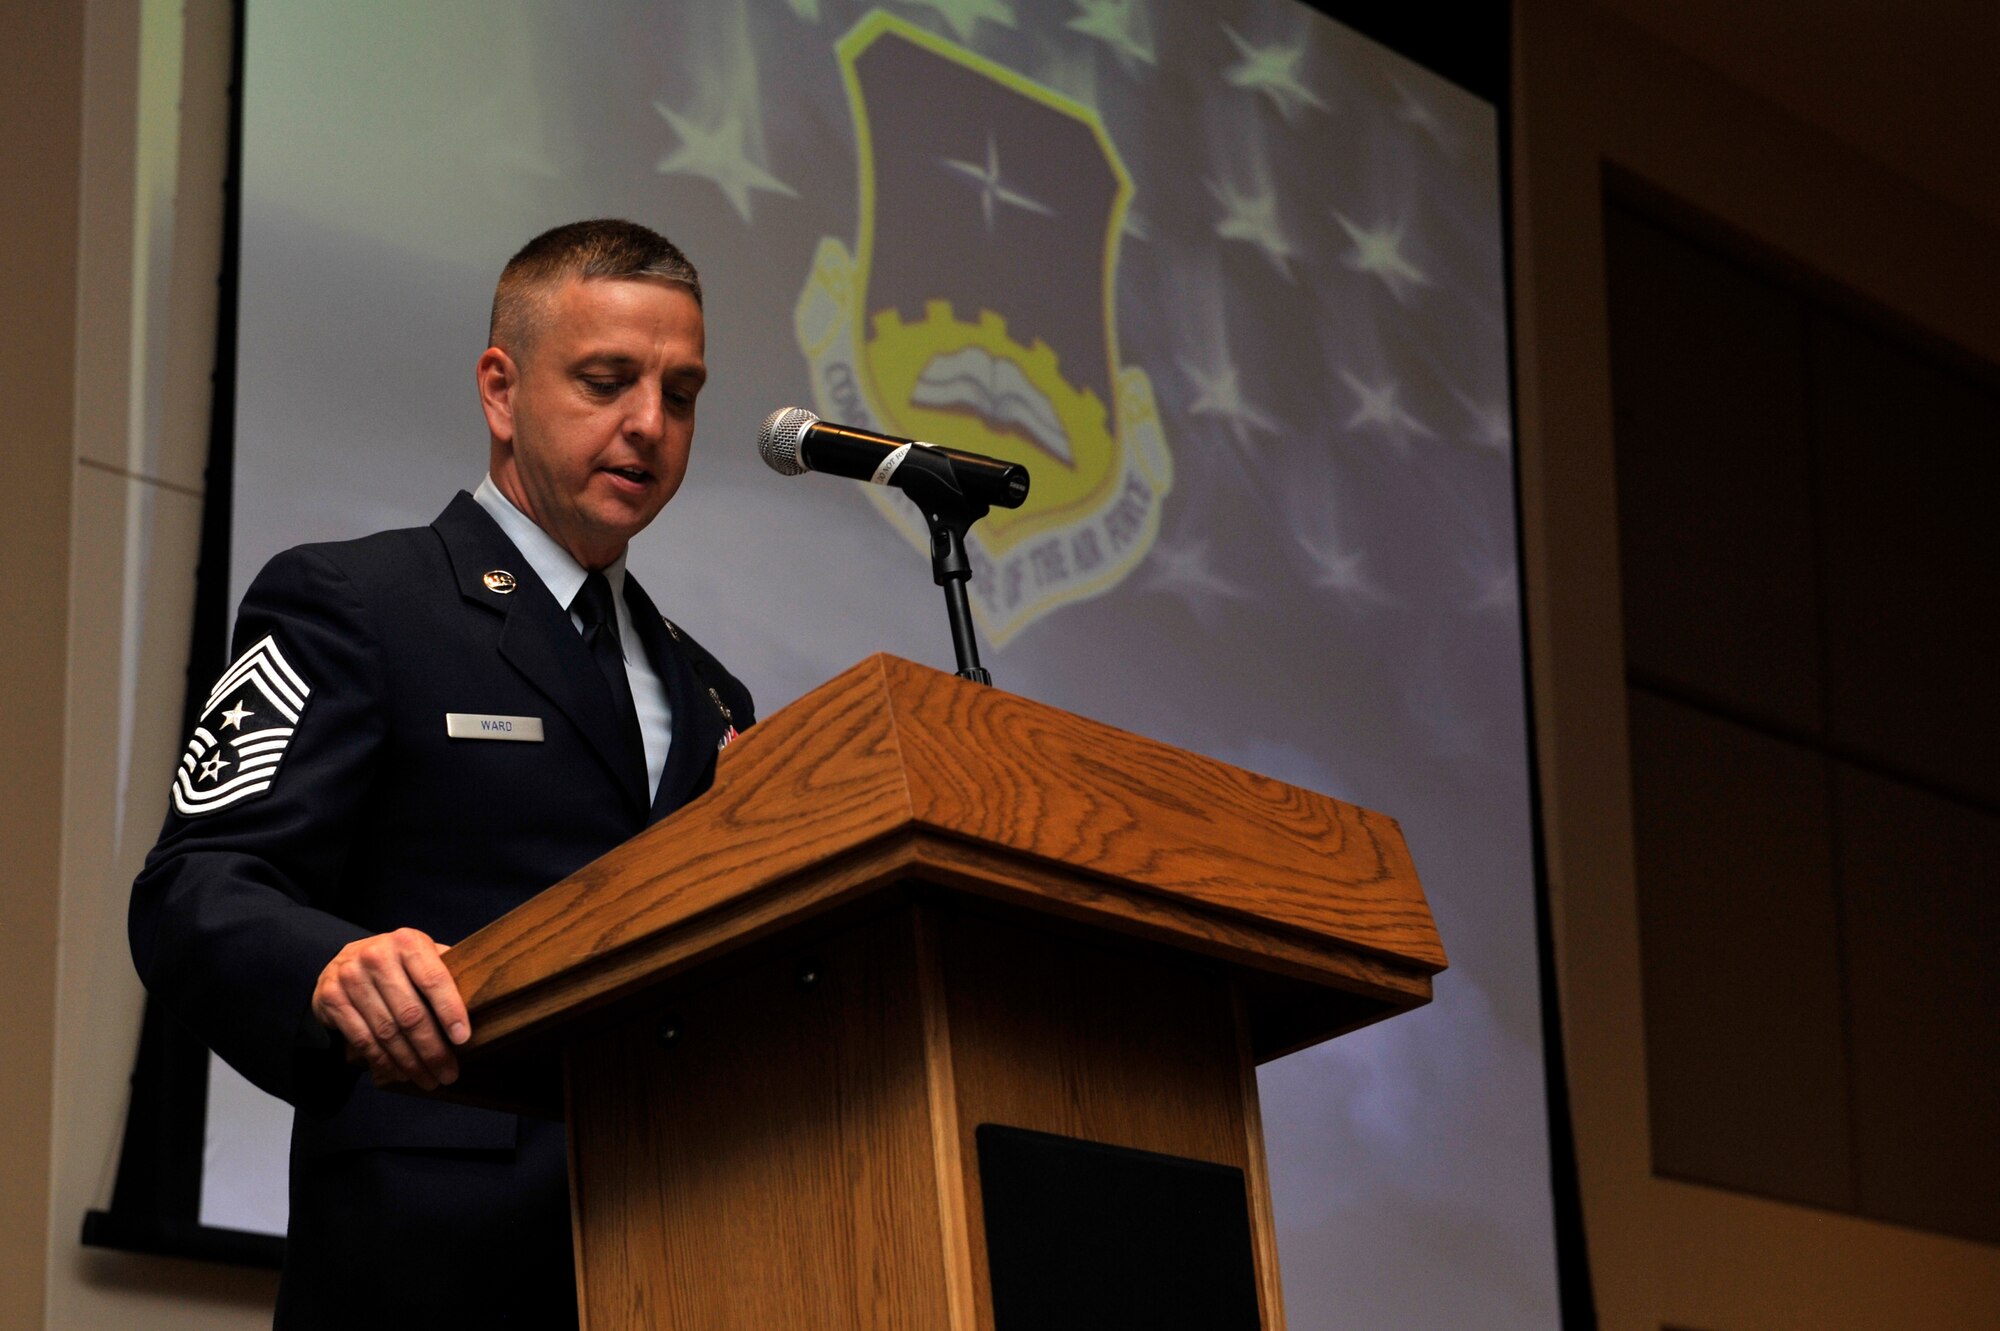 BUCKLEY AIR FORCE BASE, Colo. – Community College of the Air Force graduation guest speaker Chief Master Sgt. William Ward, 460th Space Wing command chief, addresses graduates June 29, 2012.  Ward spoke on the importance of the CCAF degree and education among the enlisted corps.  (U.S. Air Force photo by Airman 1st Class Riley Johnson)